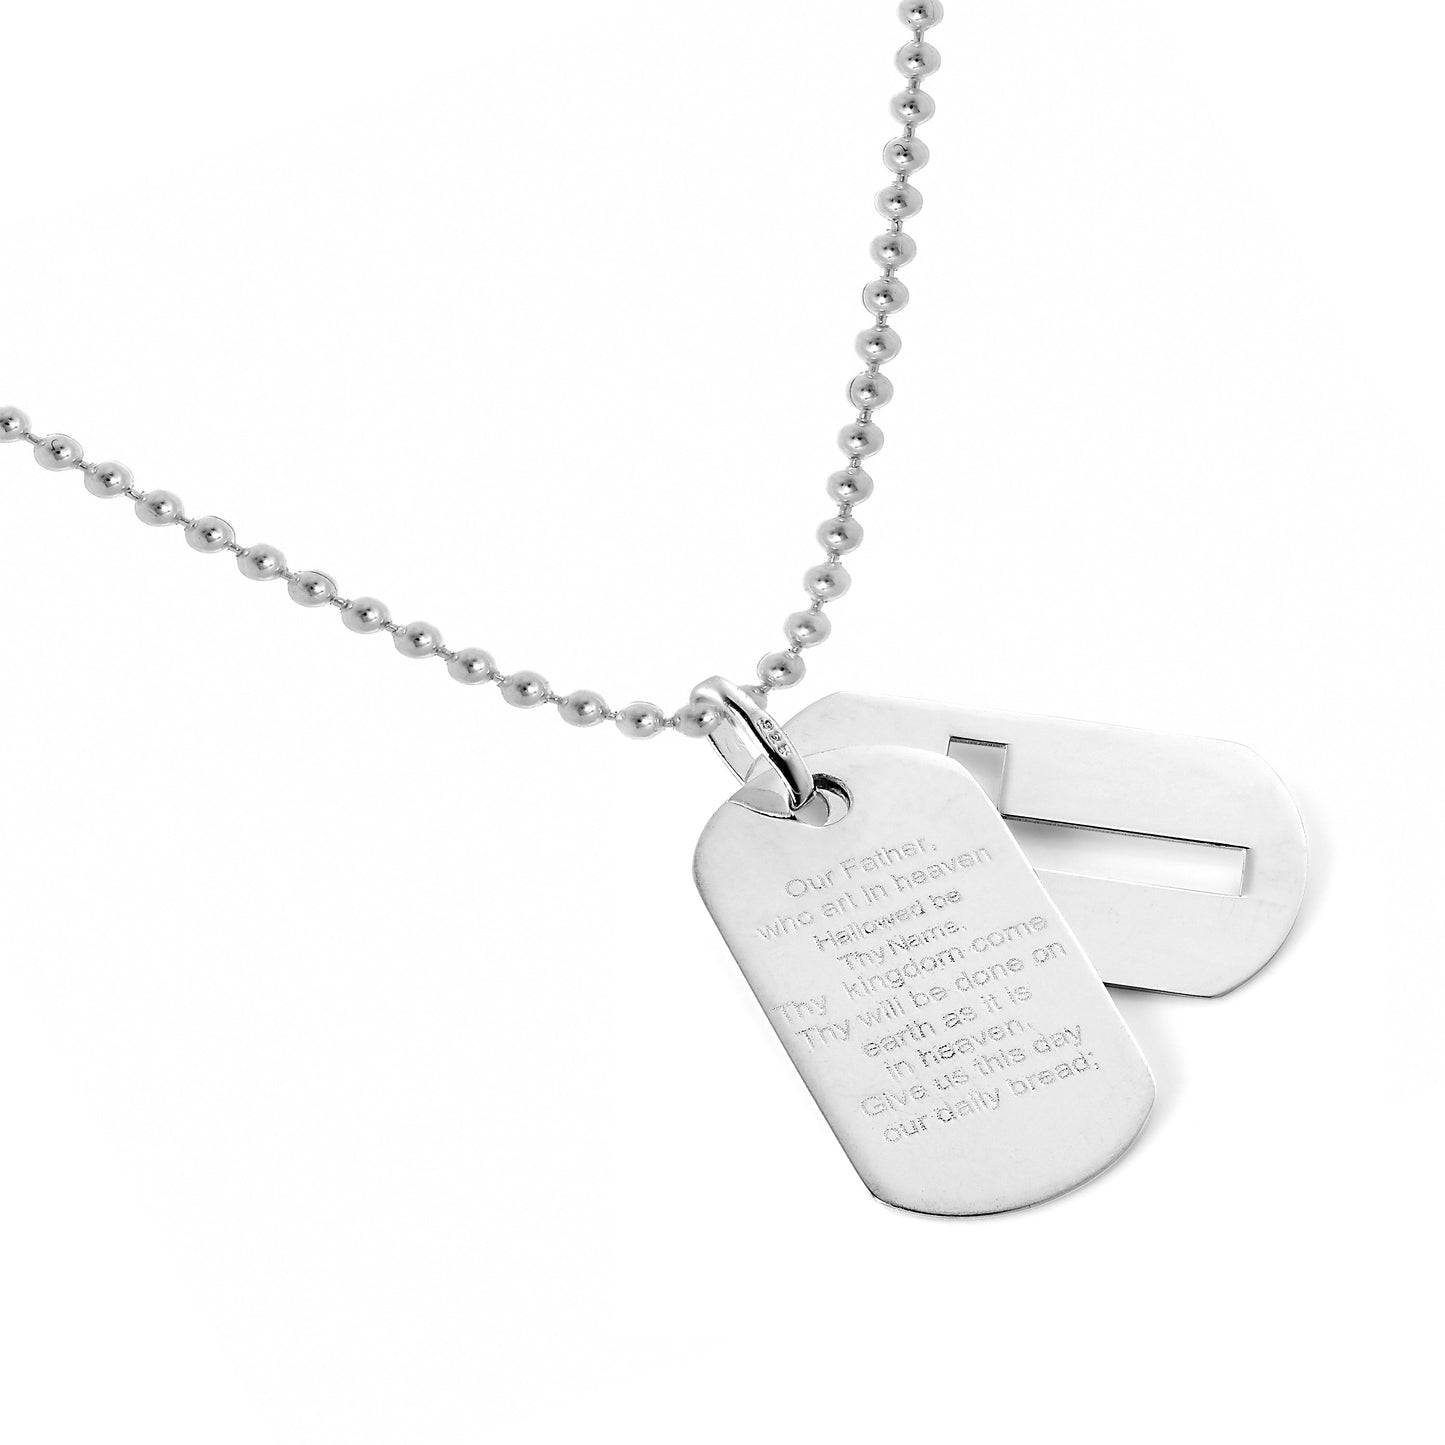 Sterling Silver Lord's Prayer & Cut Out Cross Dog Tags Pendant Necklace